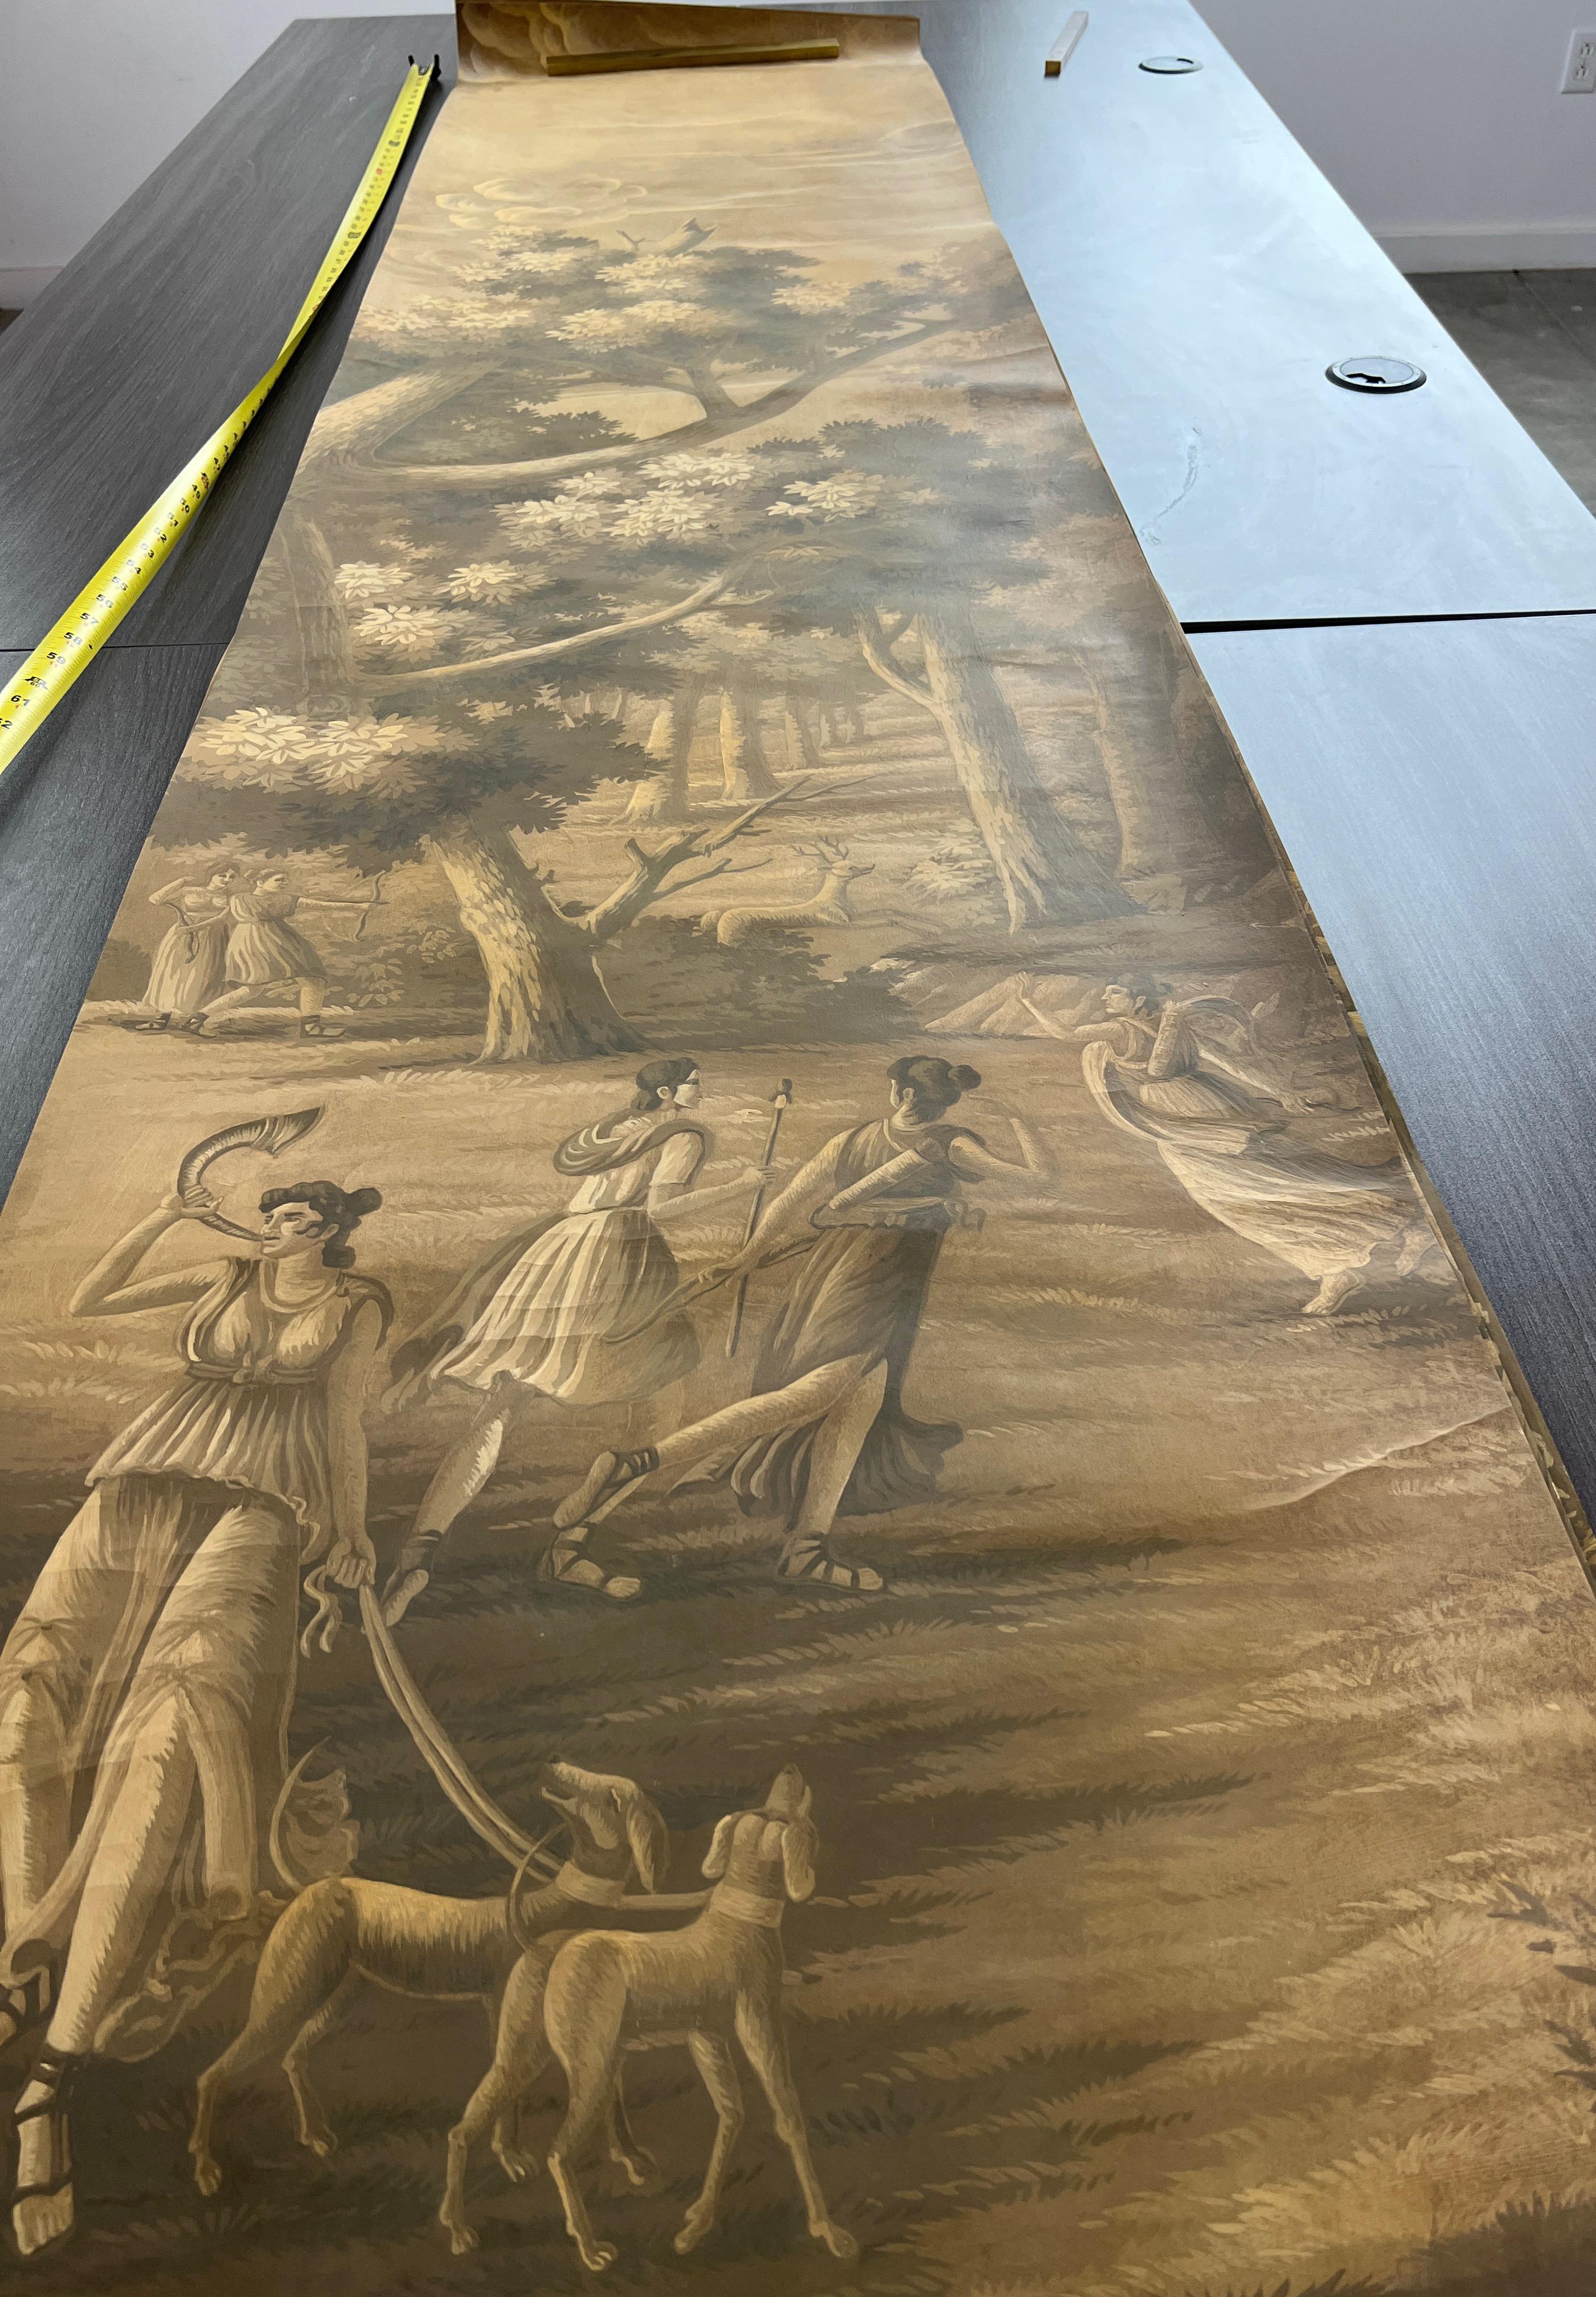 Set of 4 Handpainted Panels “Telemachus” by Dessin Fournir In Good Condition For Sale In Plainville, KS